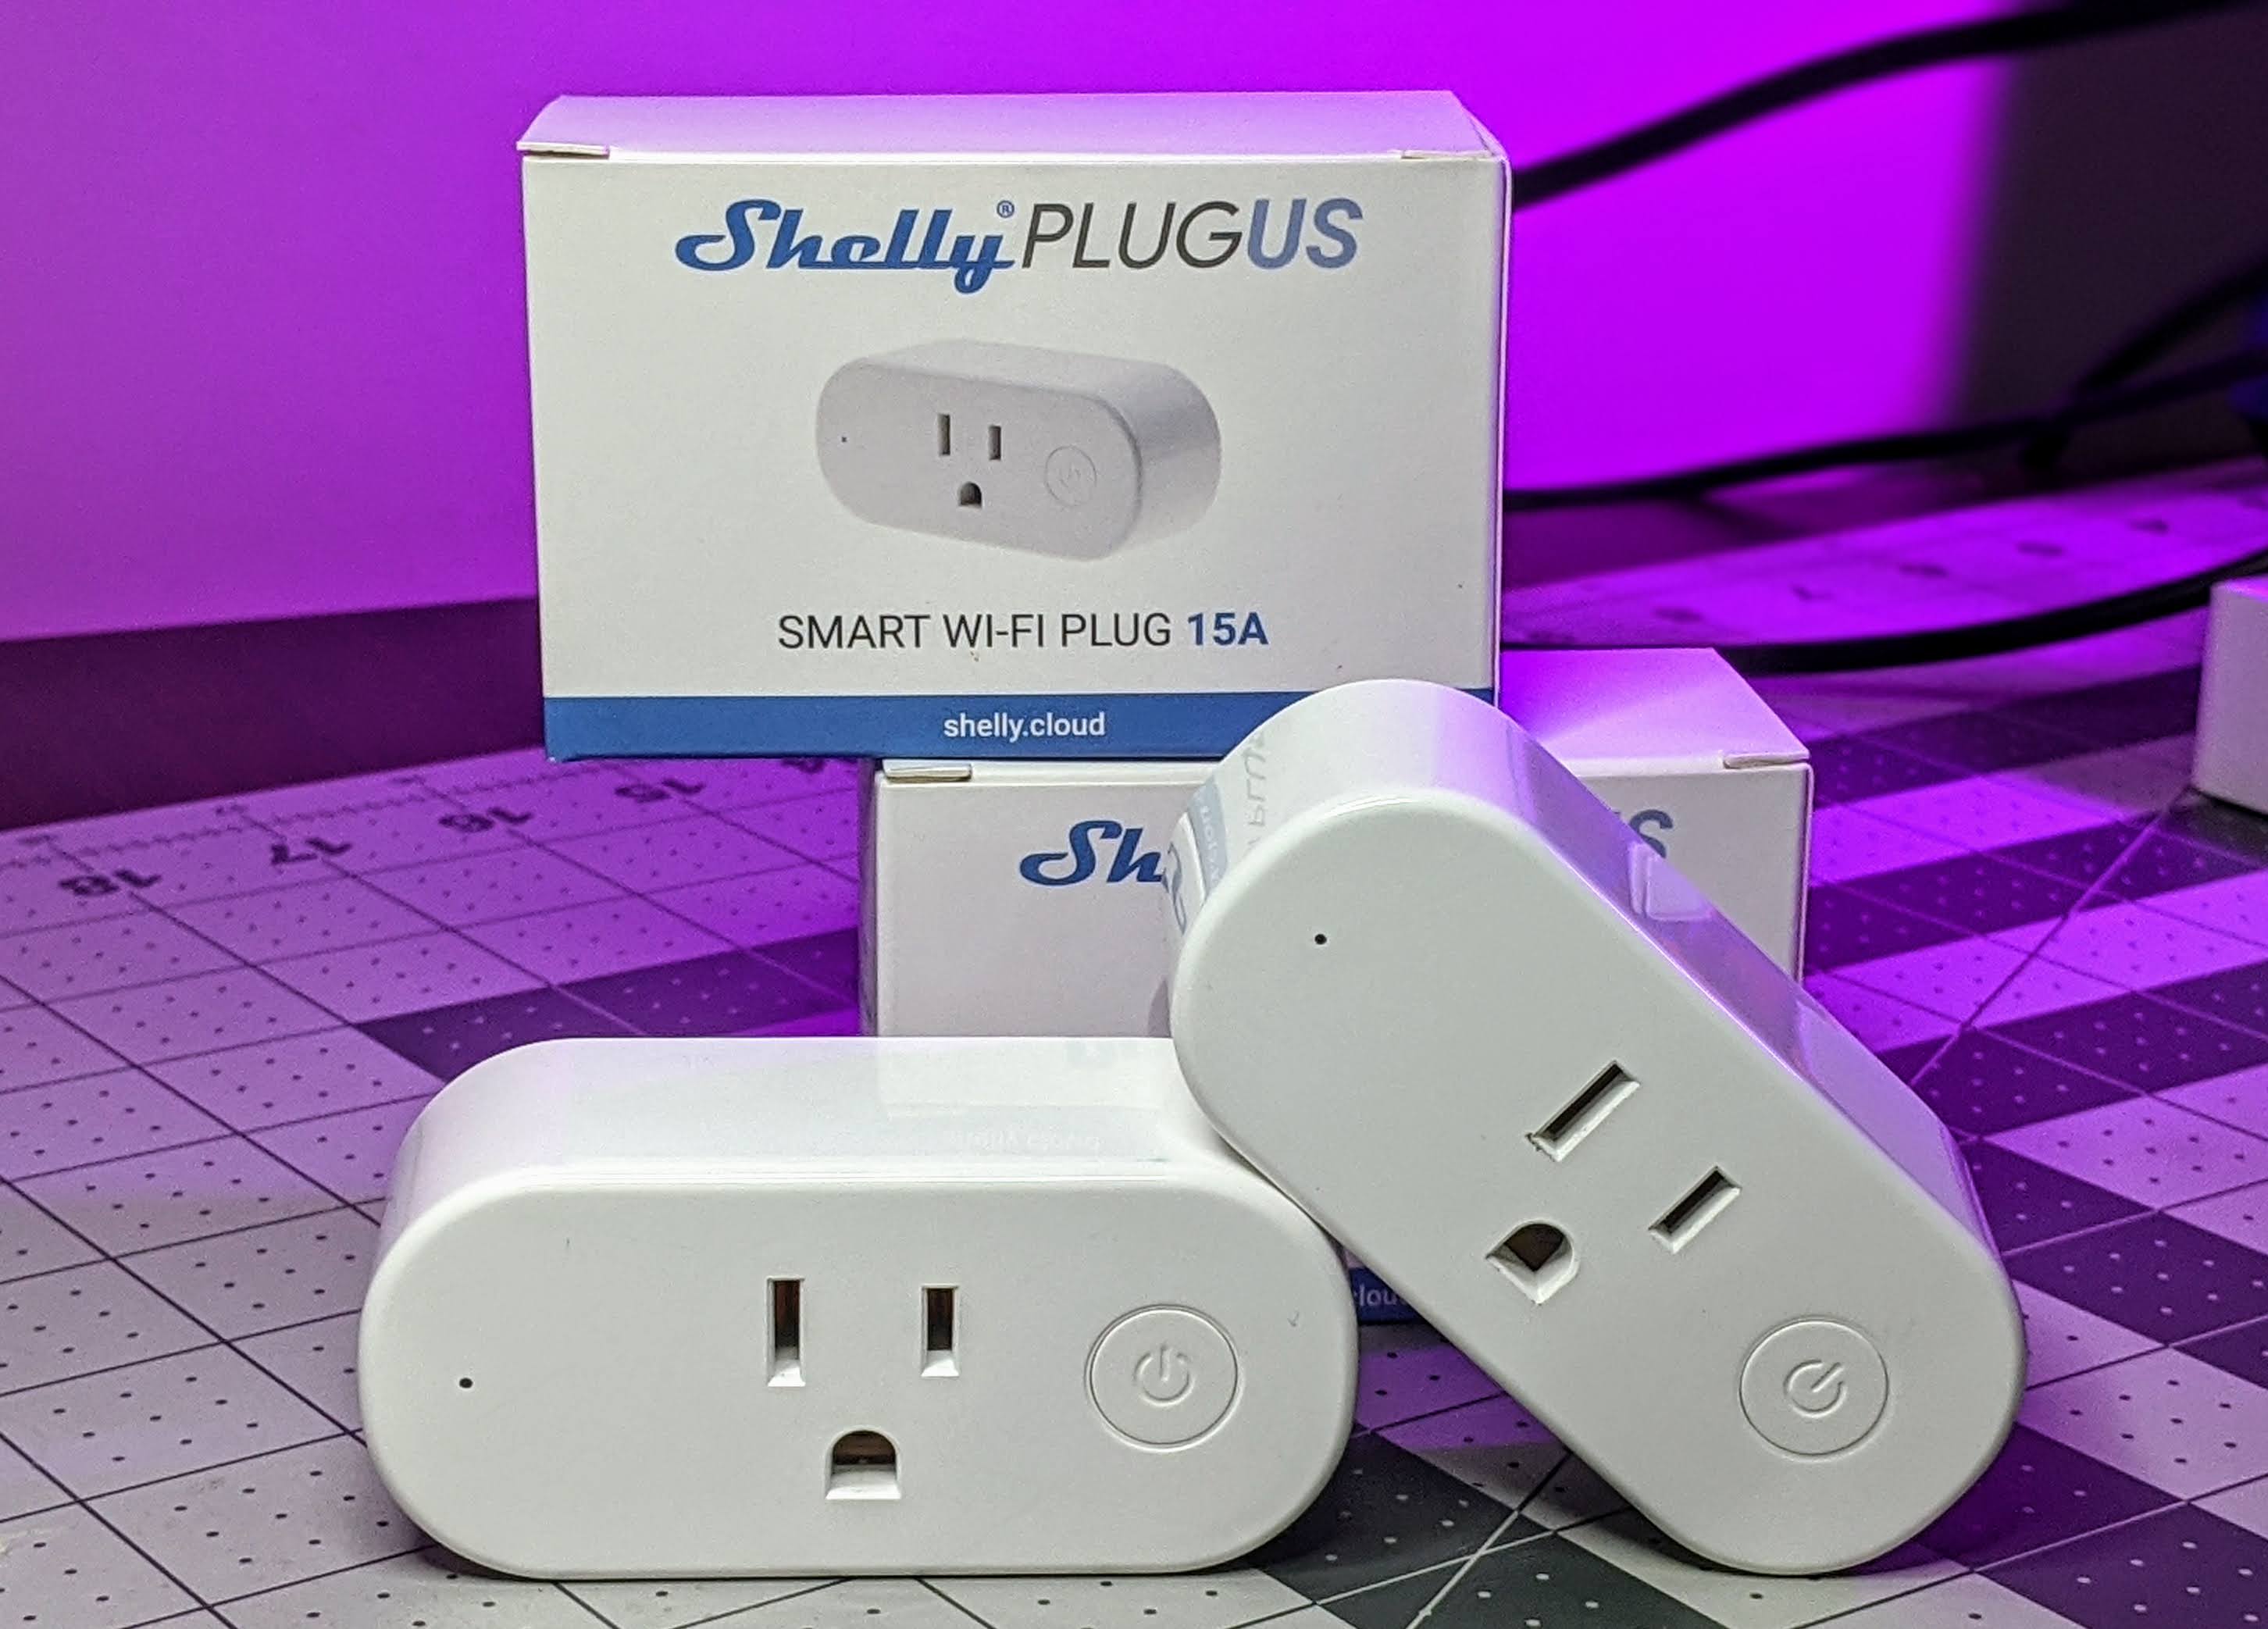 Shelly Plus Plug US (2 Pack) - Shelly Plus Plug US - All products - Shop -  Shelly